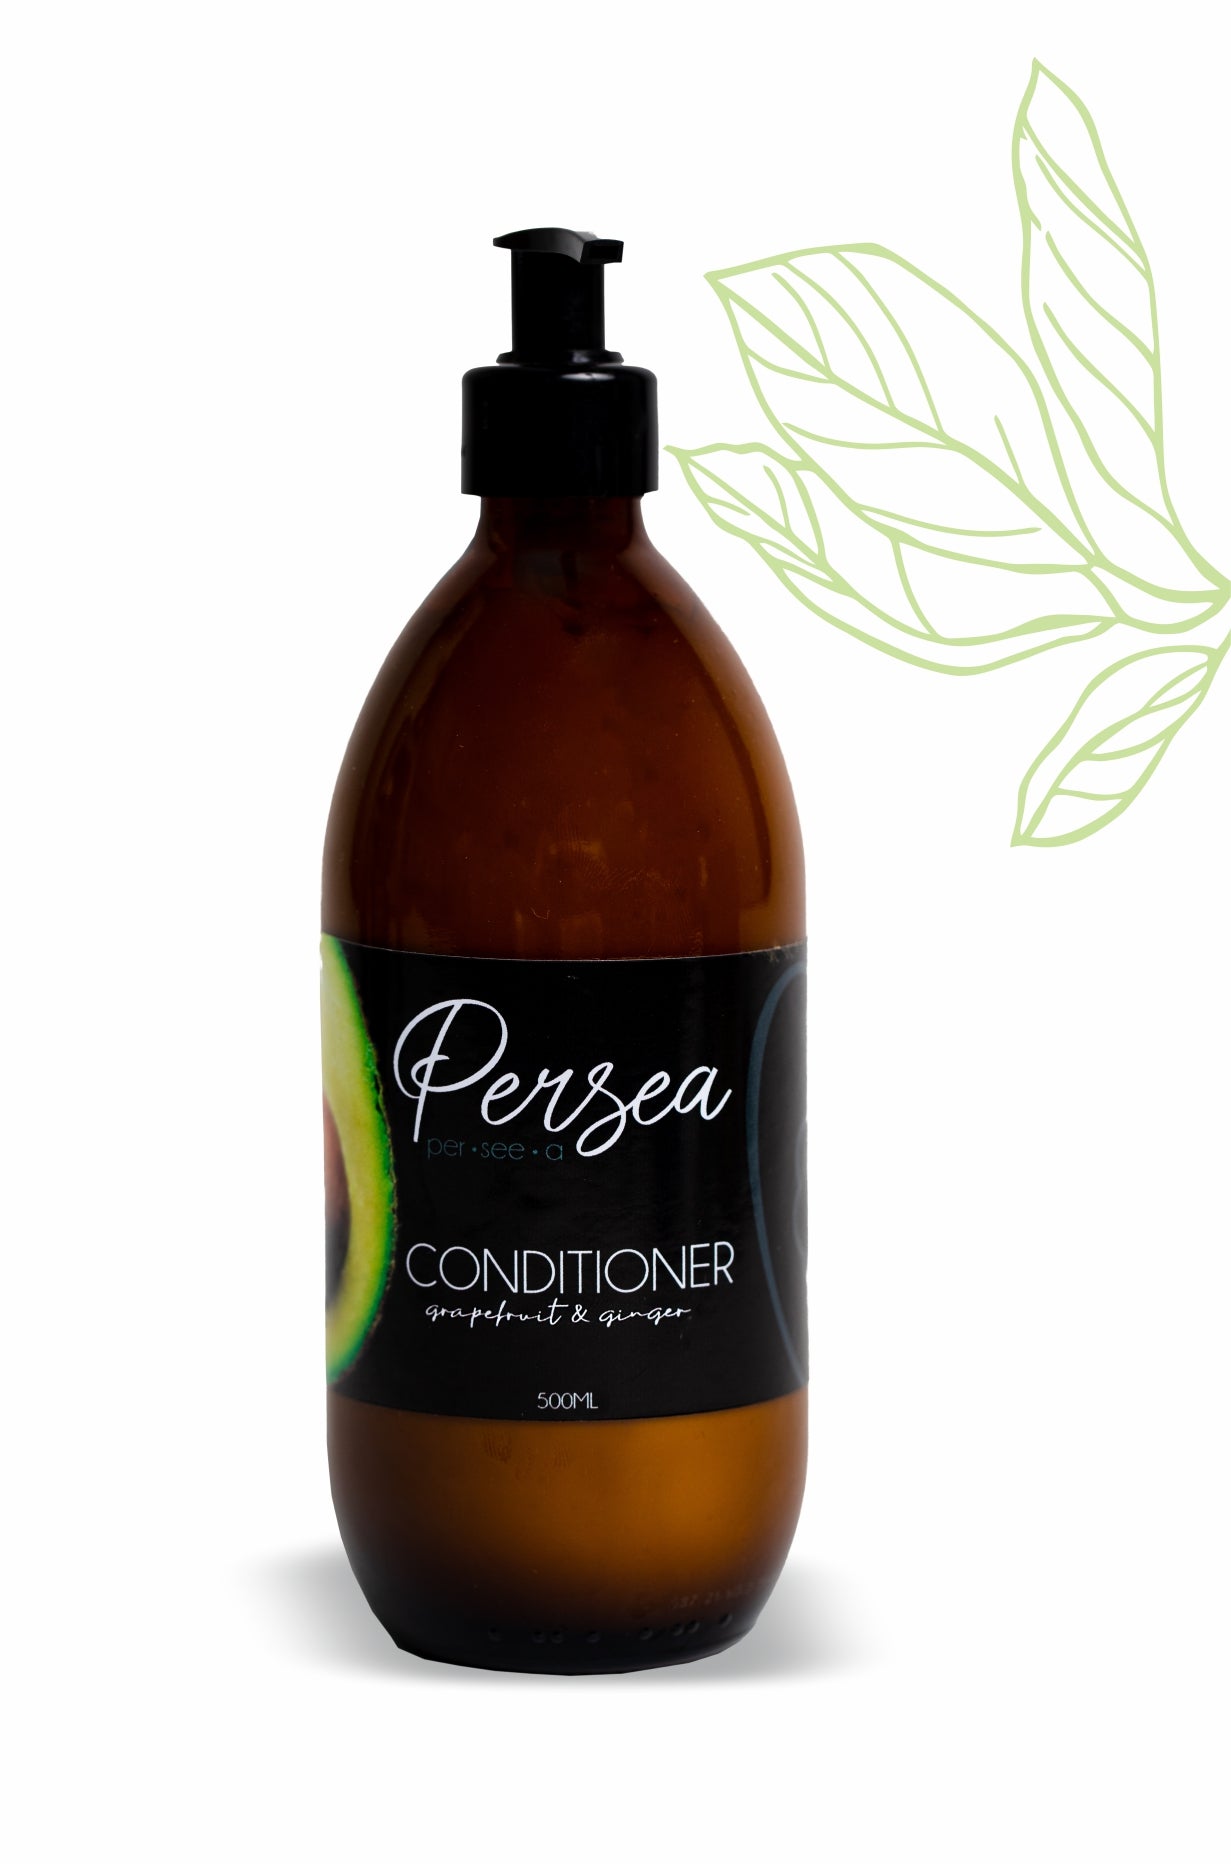 Persea Avo Conditioner. Grapefruit and Ginger Scent. All Natural. Phosphate free. Good hair day!